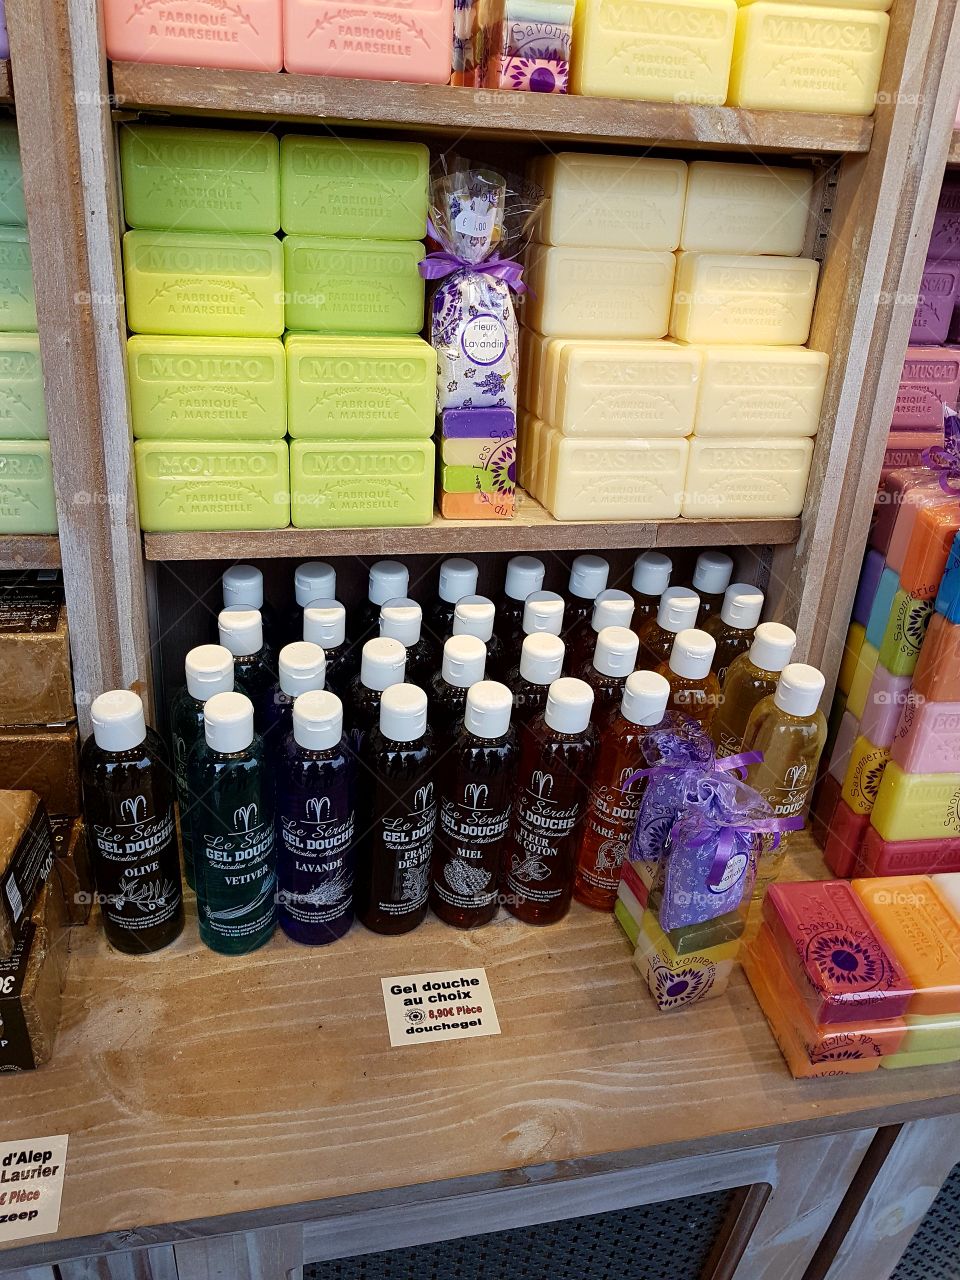 Oils and Handmade soaps sold in market